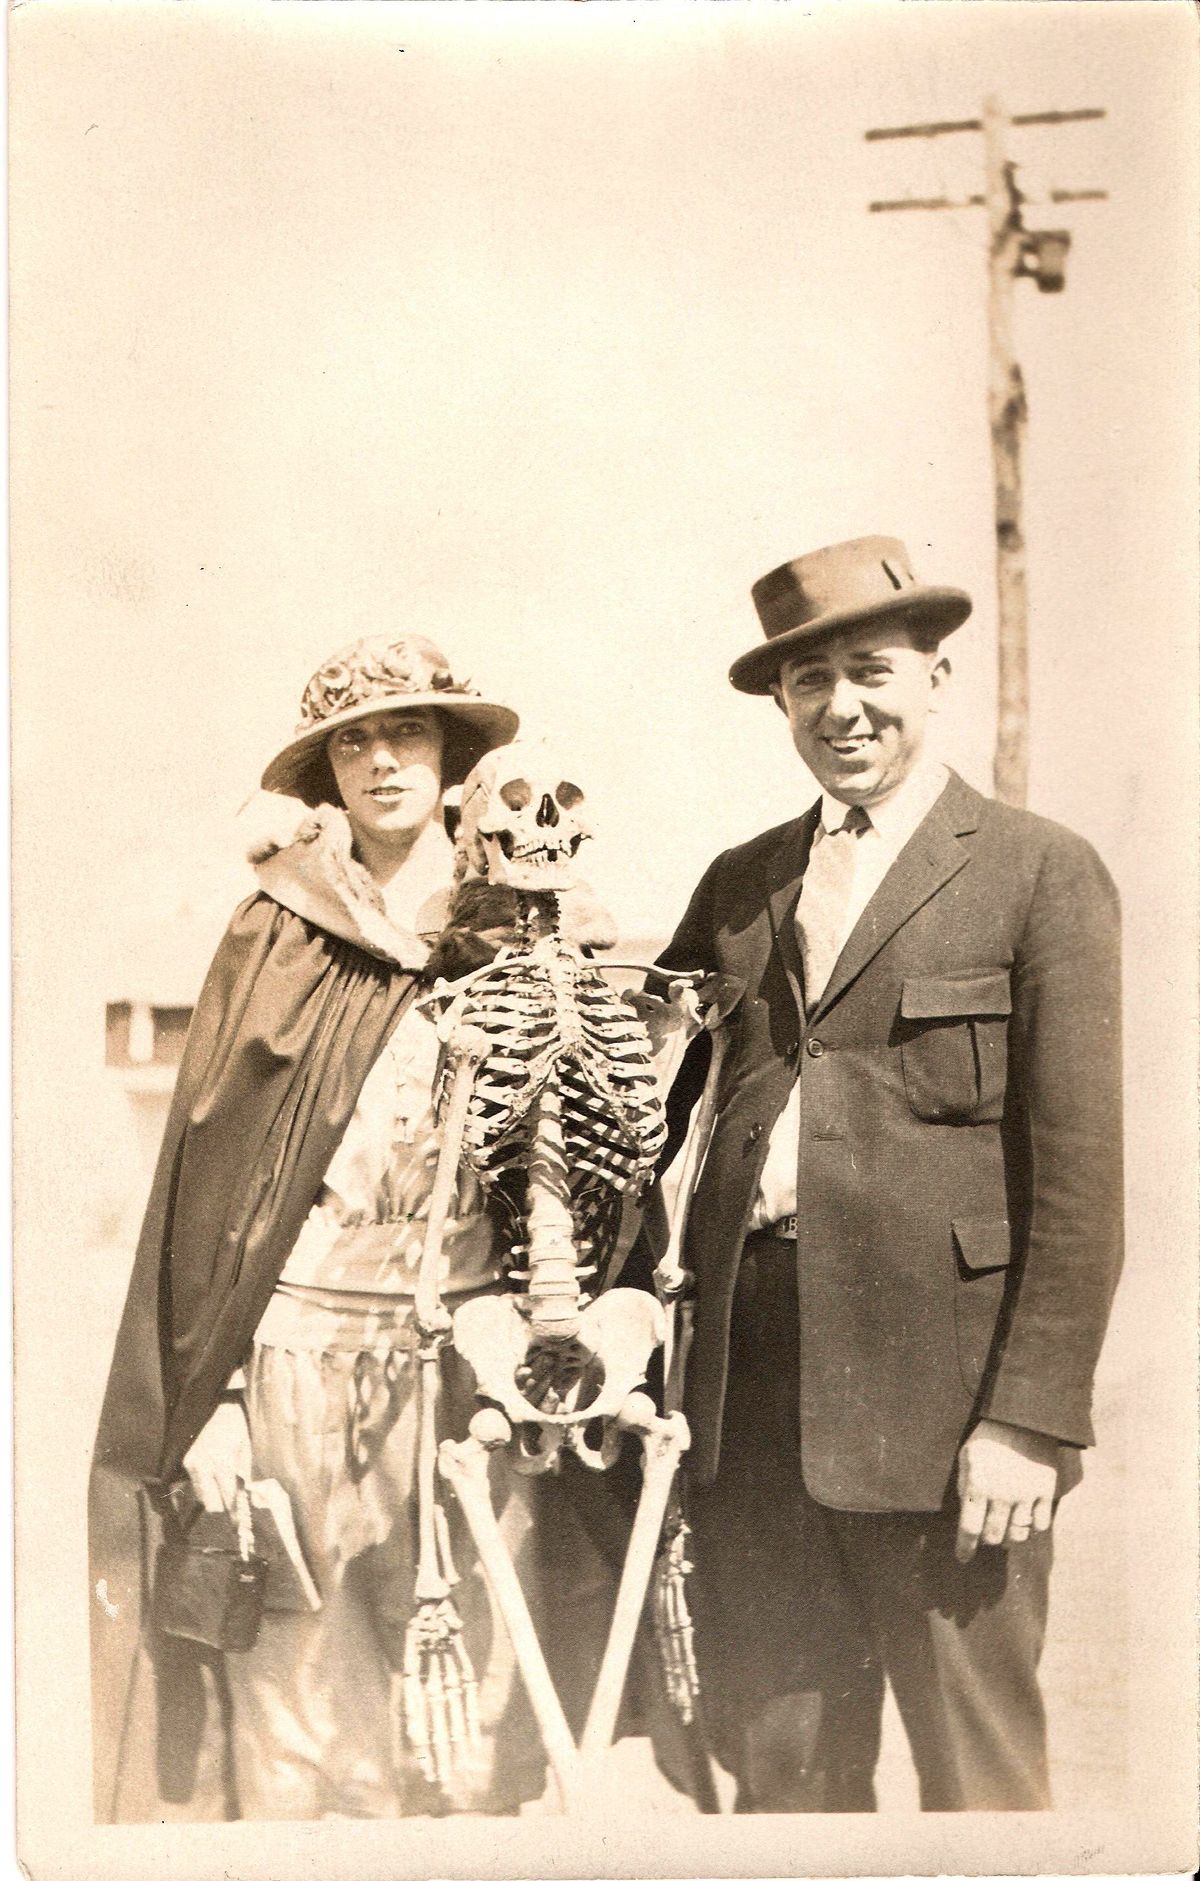 Felix with George Becker Sr. and his sister, 1927.